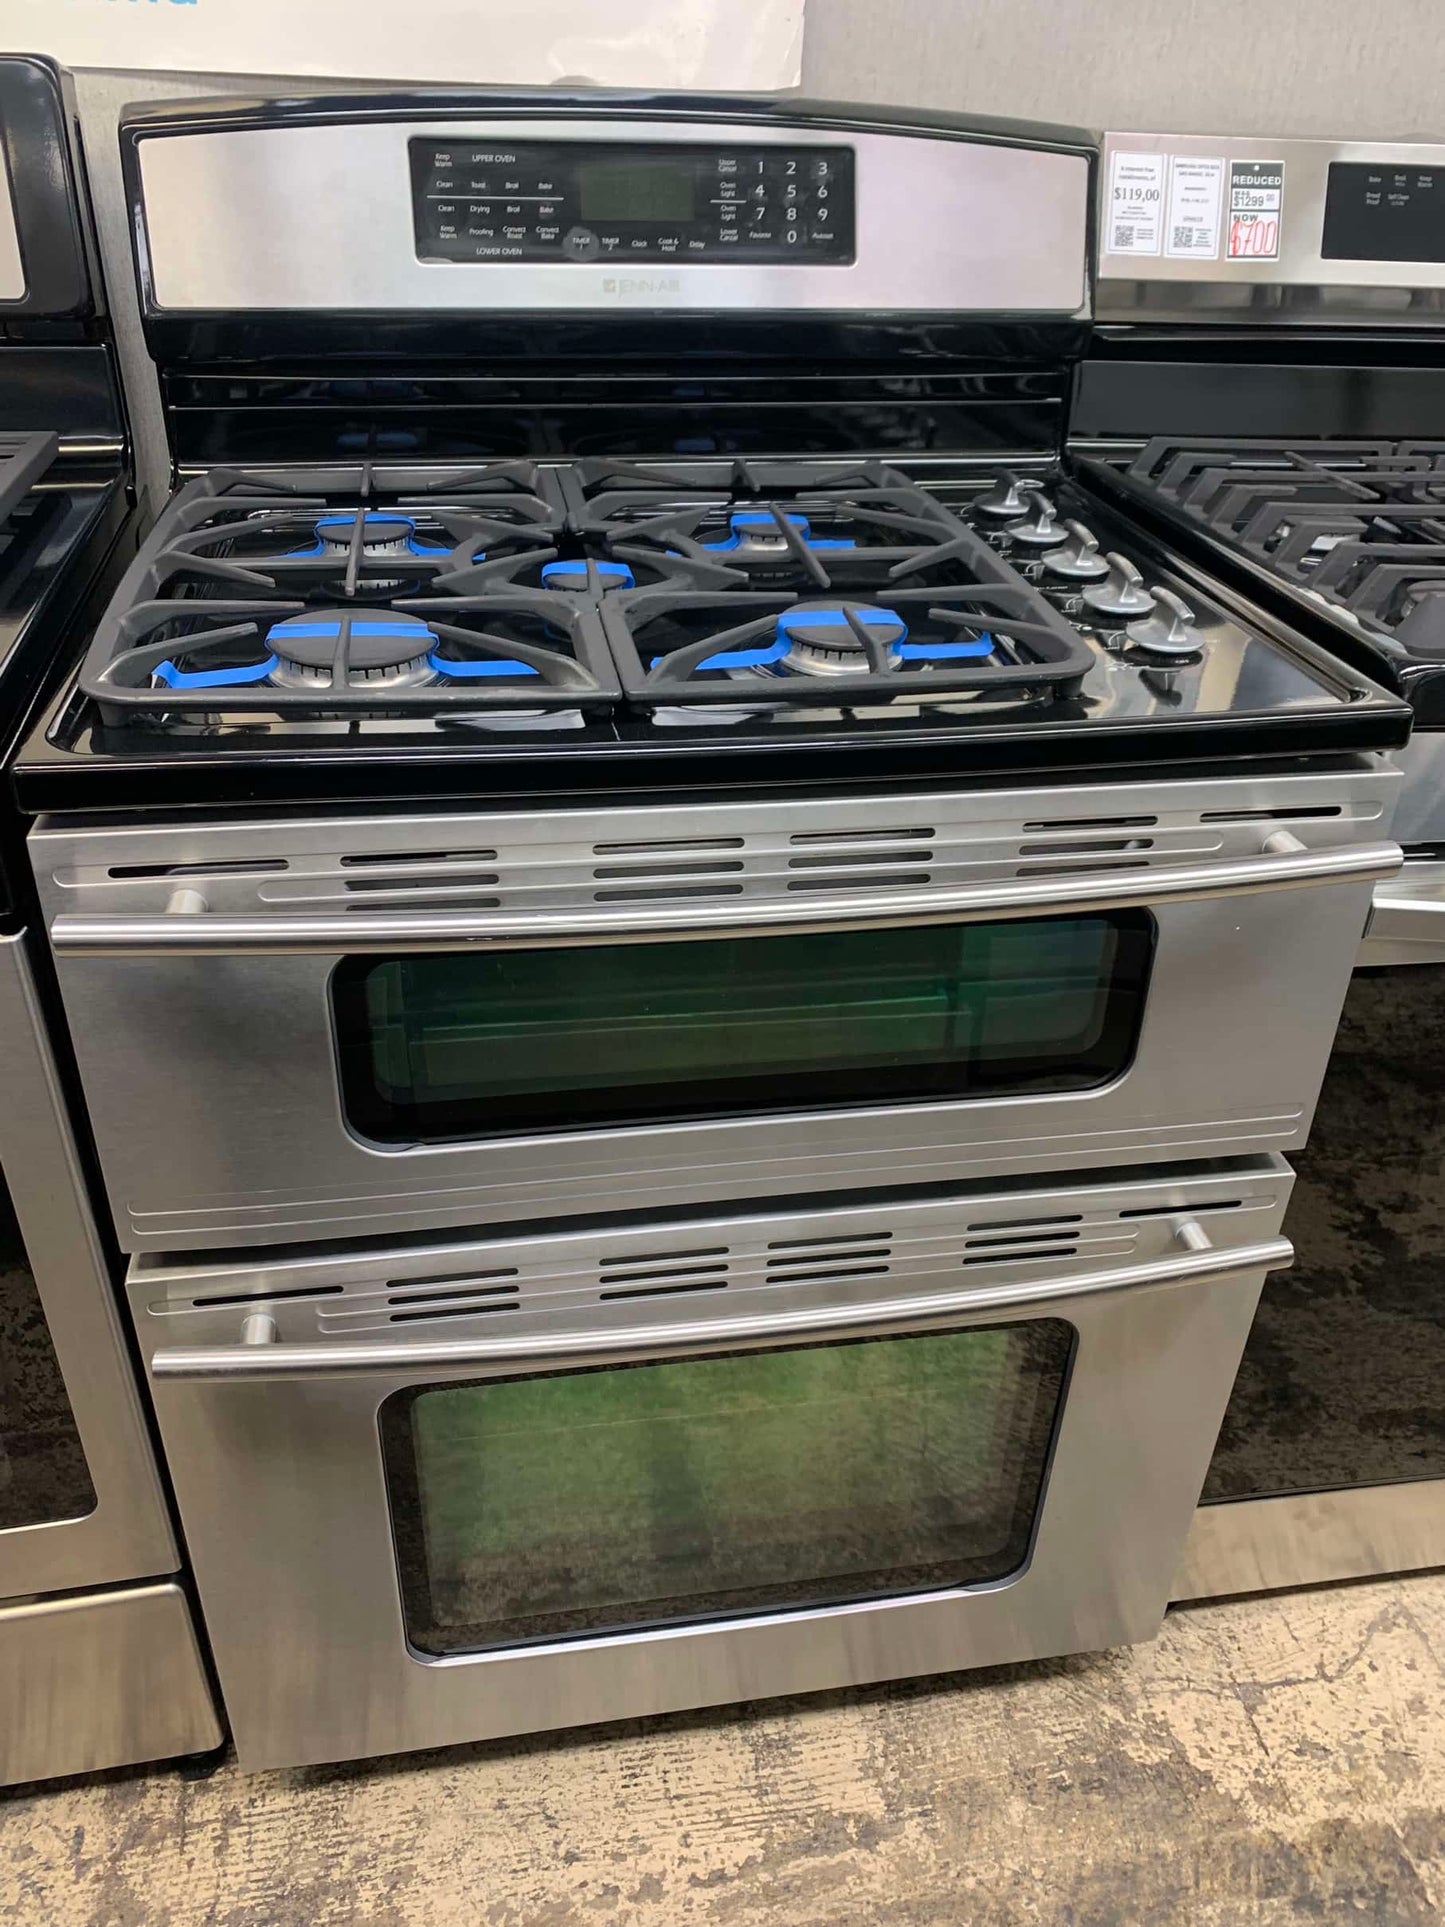 JENN-AIR dual fuel Gas top range 5 burner stainless steel   electric double oven convection broil 220v 30 in so